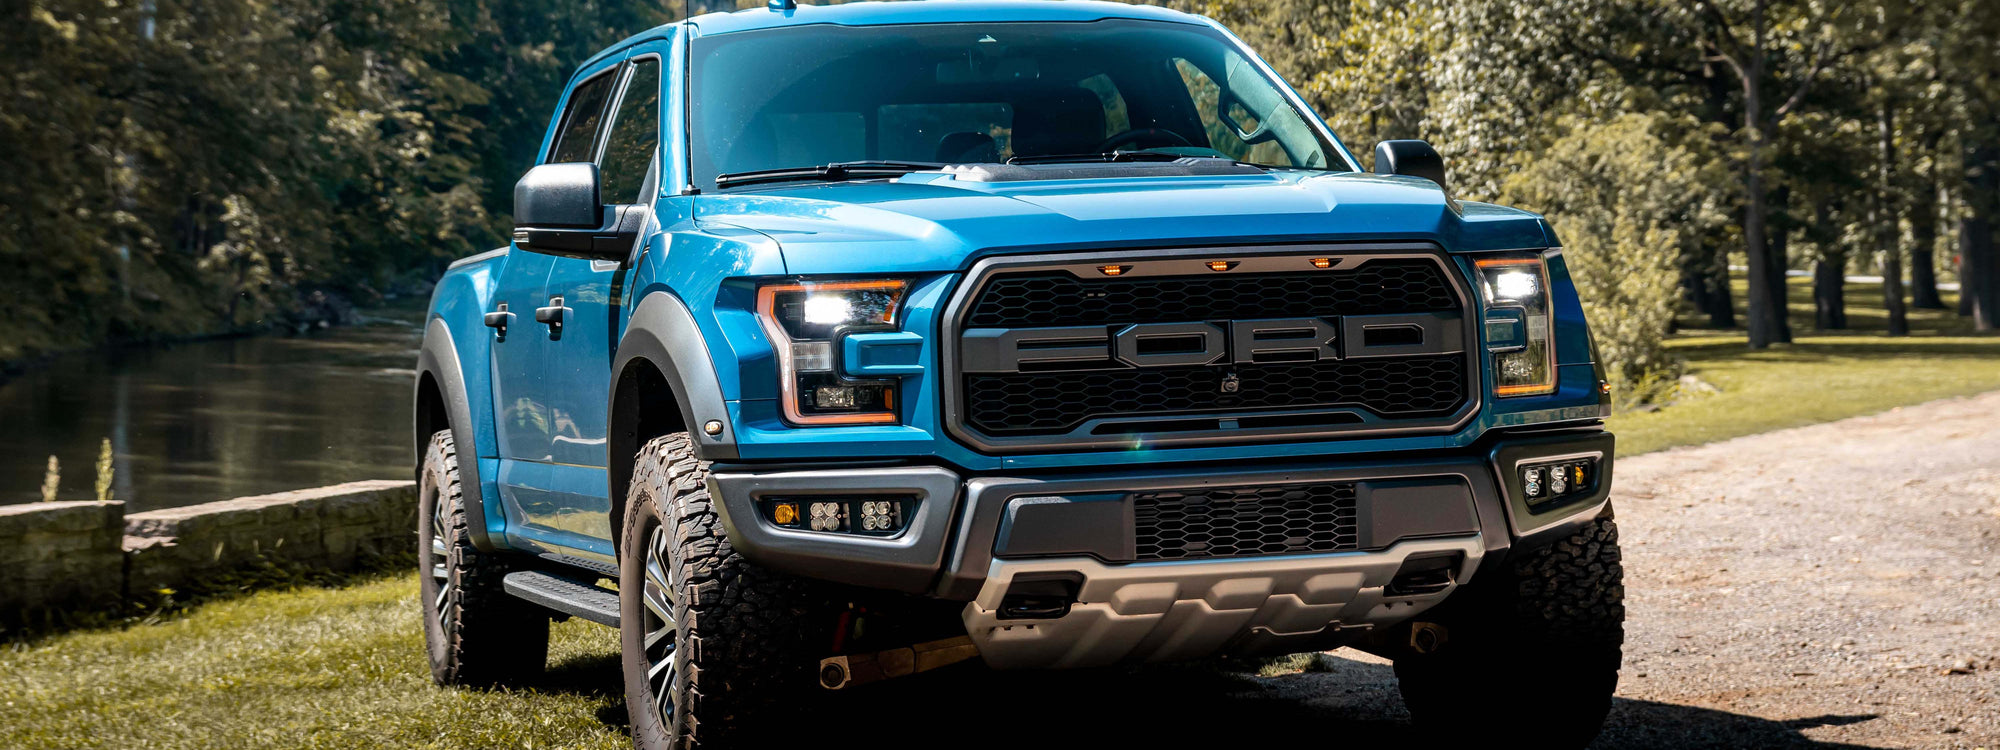 Ford Raptor Parts | Shop for Aftermarket Ford Raptor Mods & Performance from CORSA PERFORMANCE